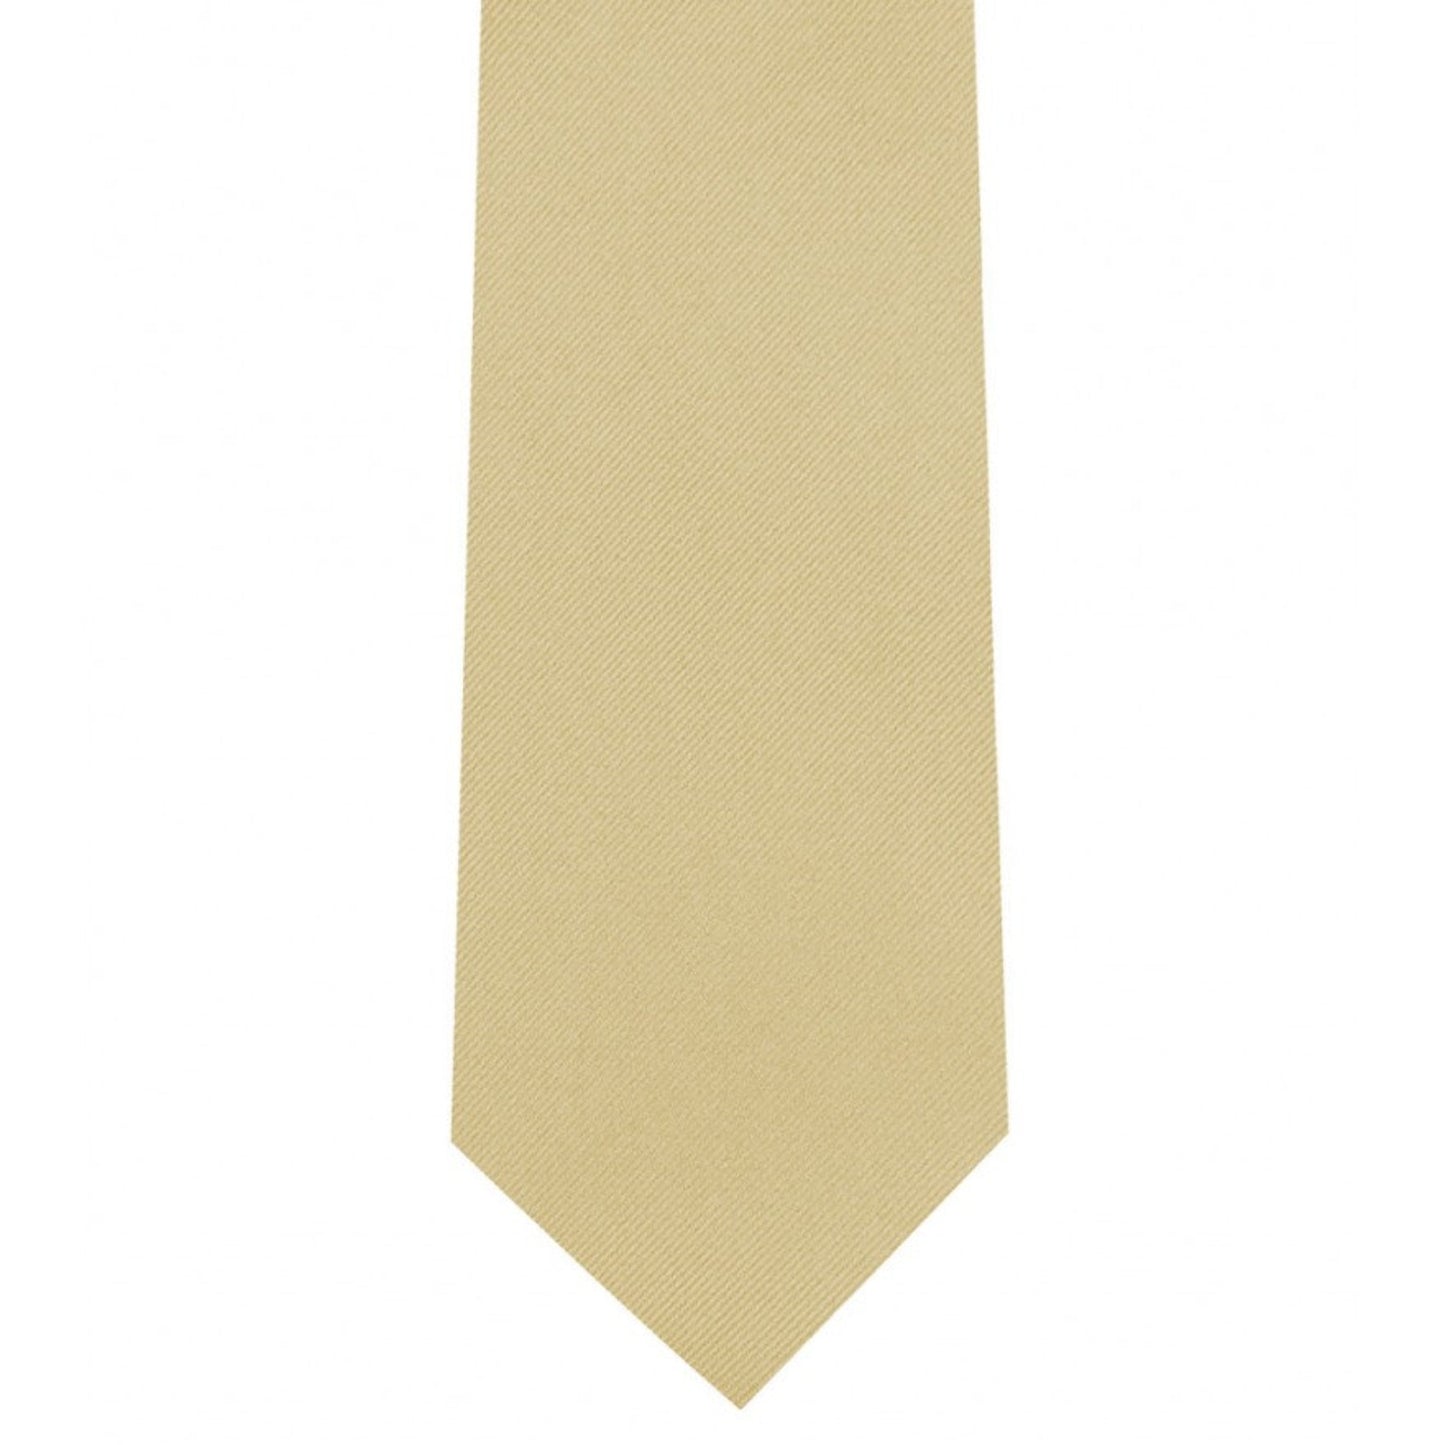 Classic Beige Tie Ultra Skinny tie width 2.25 inches With Matching Pocket Square | KCT Menswear